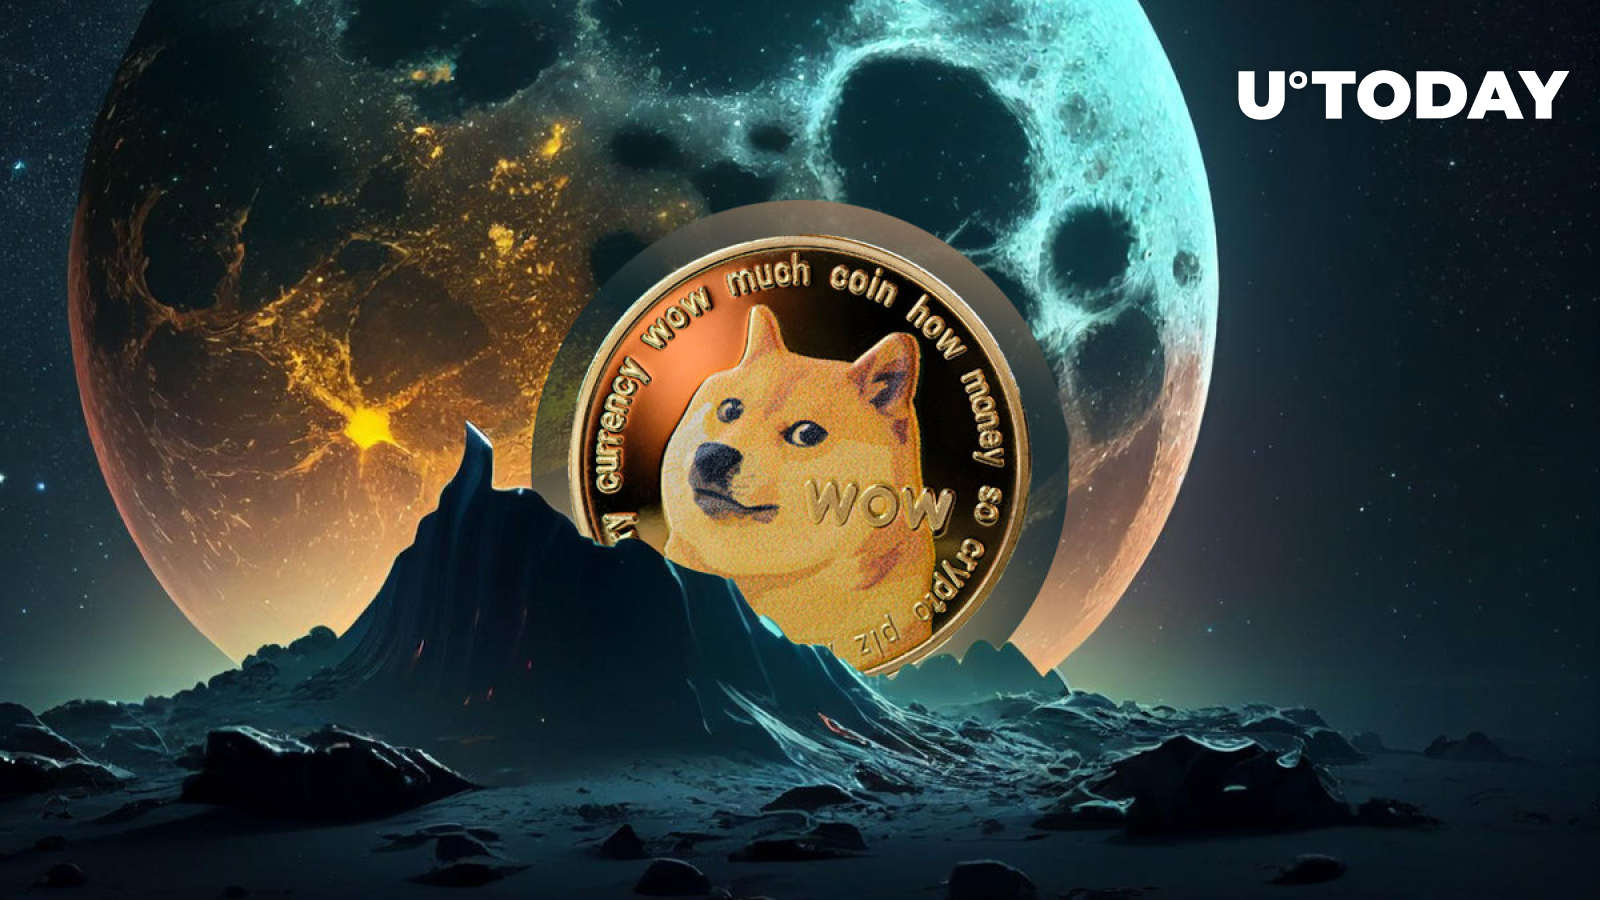 Dogecoin to Moon: 635 Million DOGE Change Hands Ahead of DOGE-1 Mission